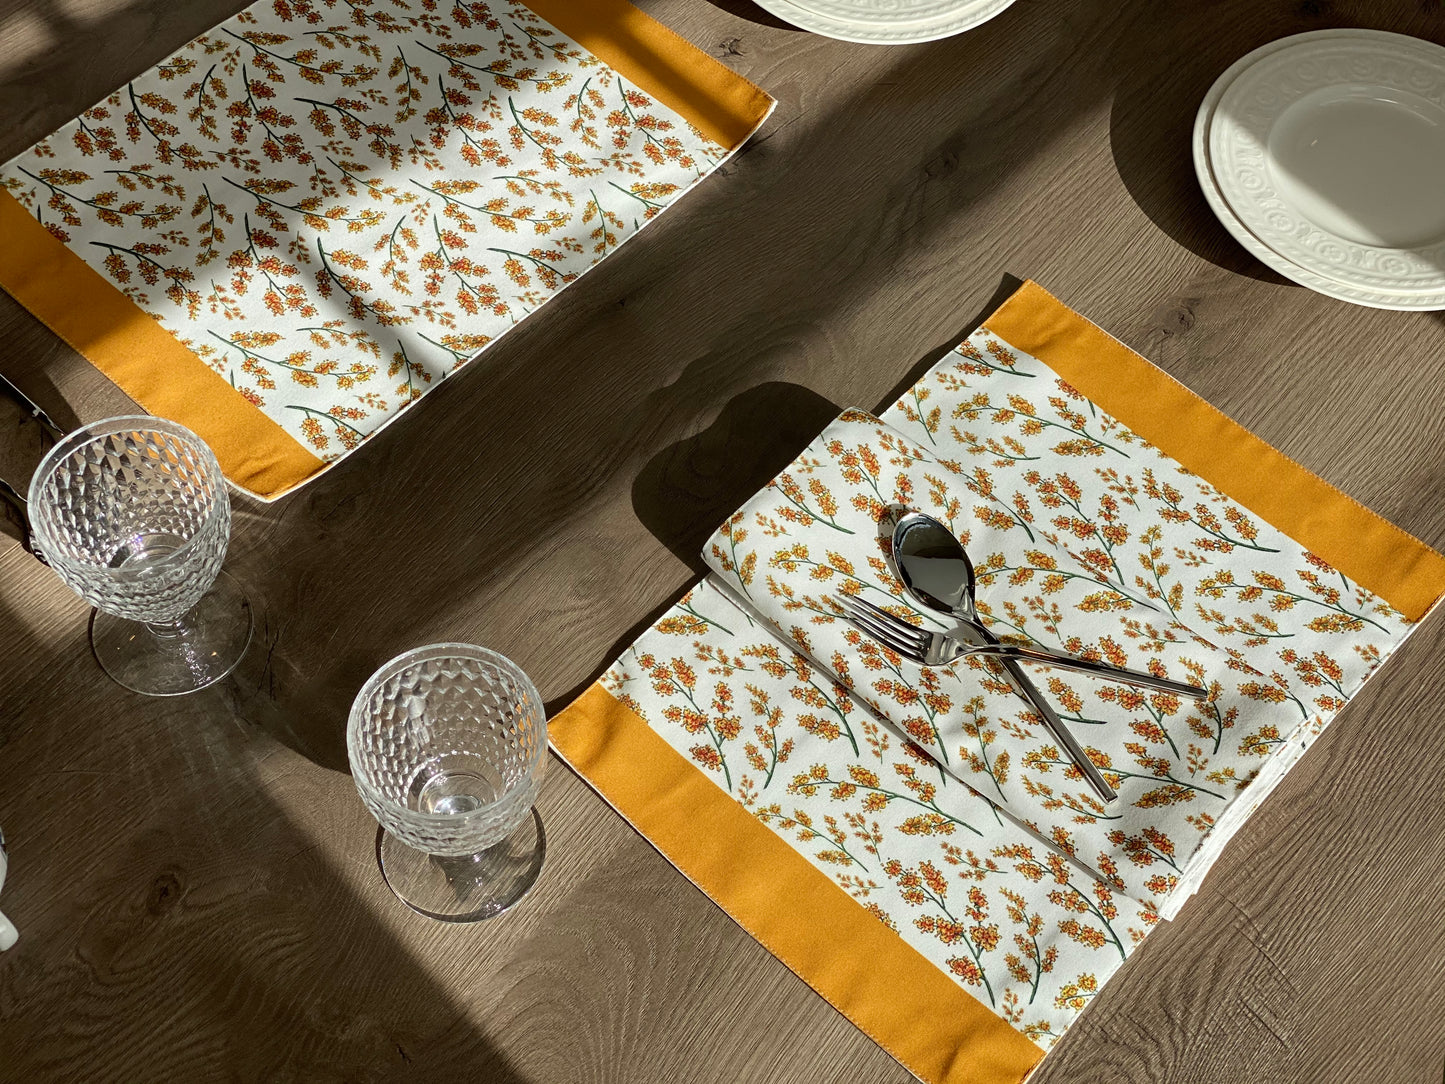 Set of 4 Mimosa Flower Placemat, Yellow Floral and Green Branch Pattern, Washable Cotton Placemat for fall dining table